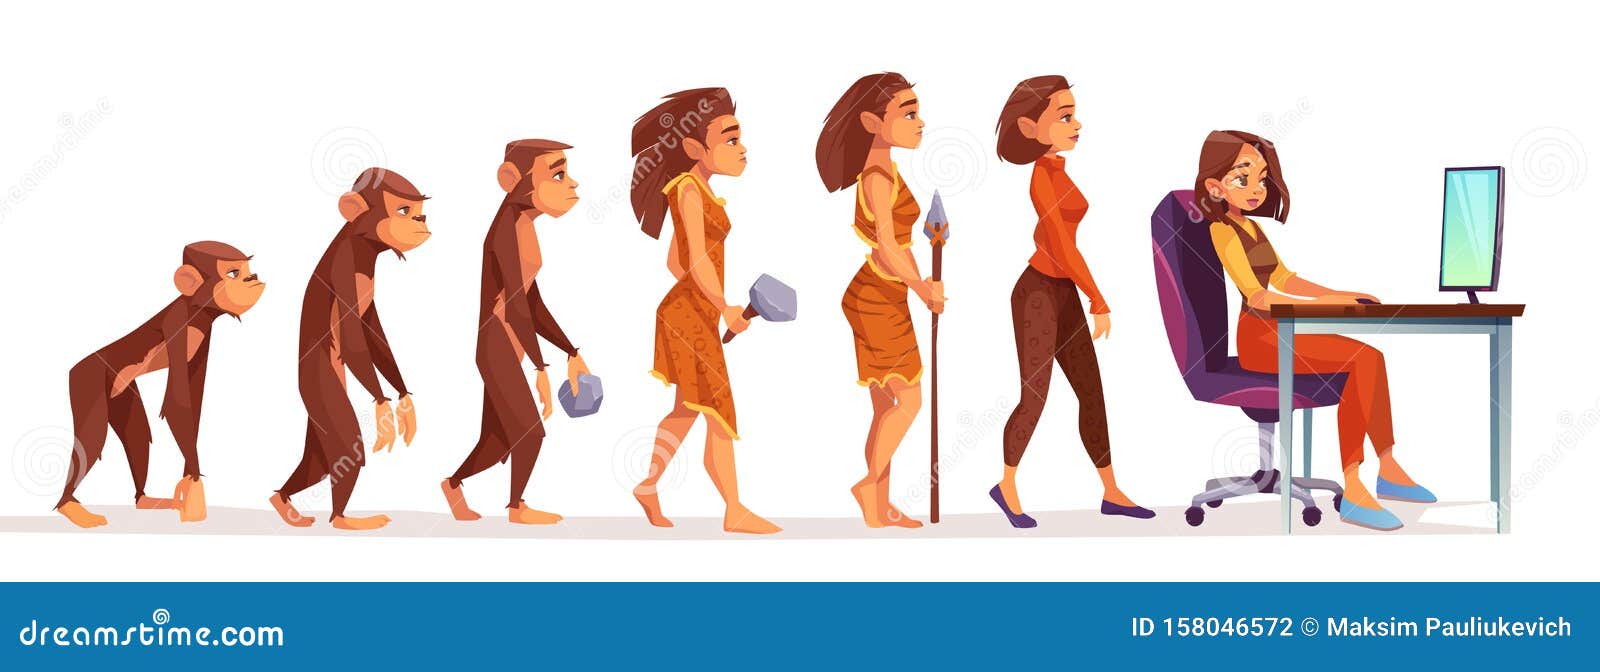 human evolution from monkey to woman freelancer